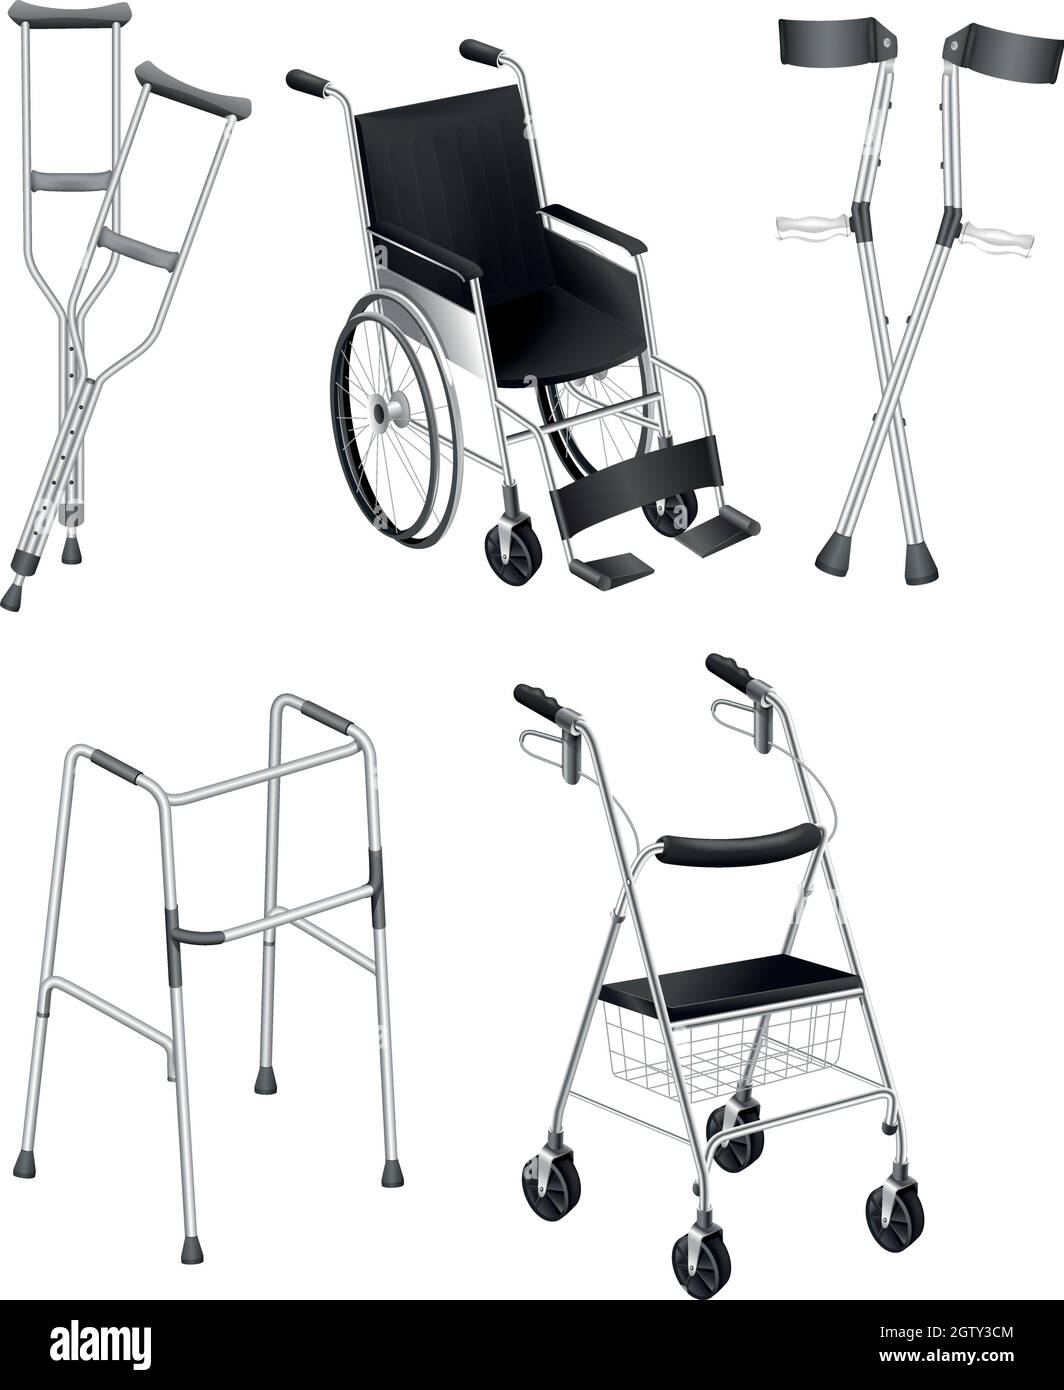 Crutches and Wheelchairs Stock Vector